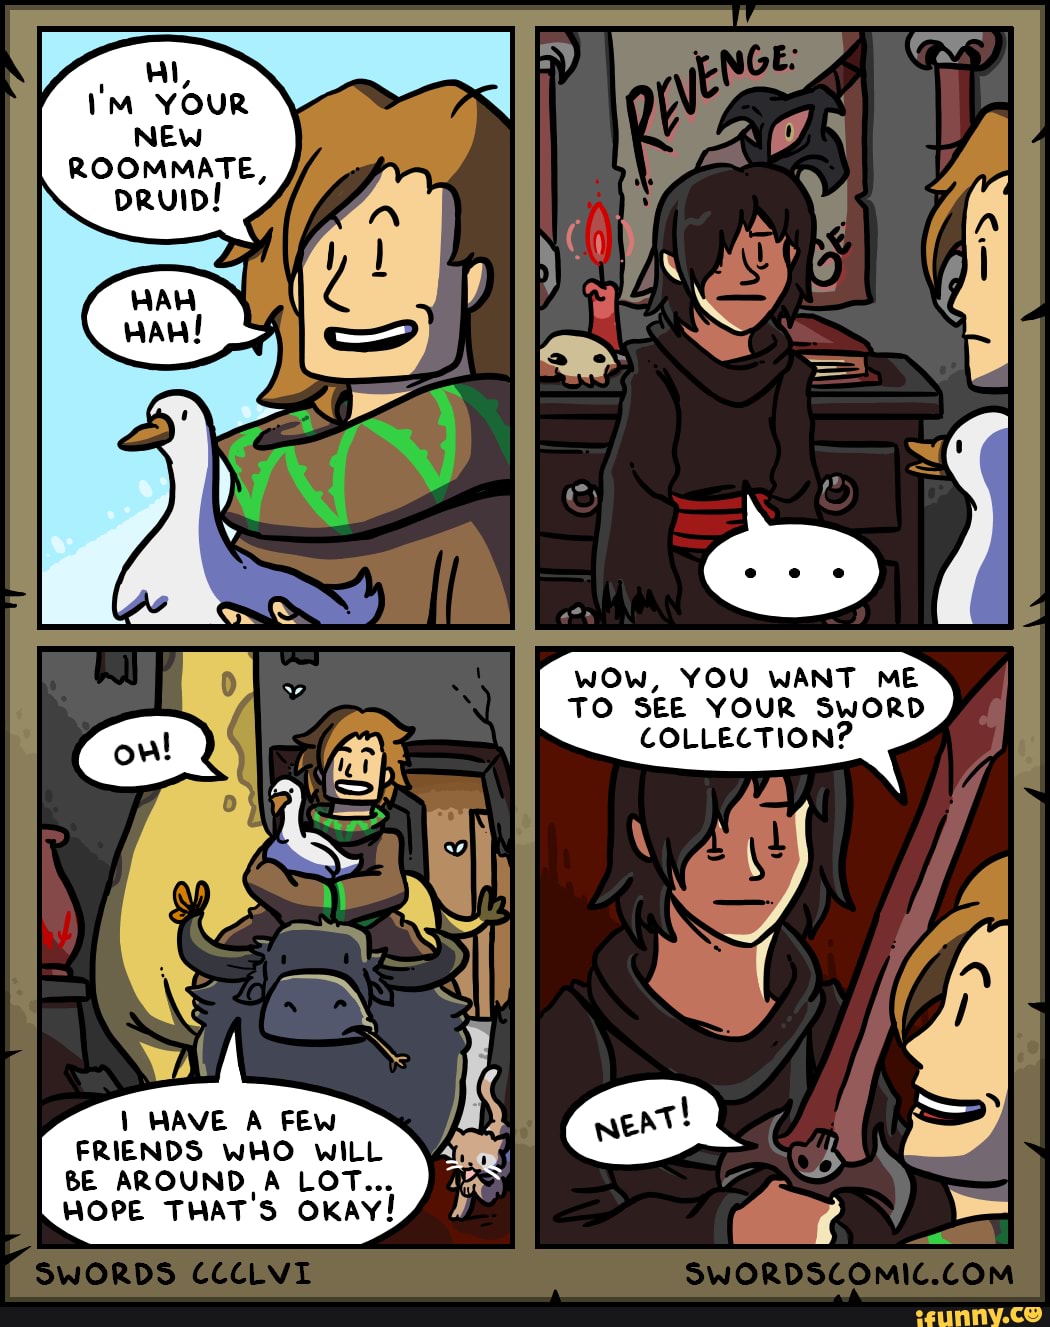 comics - Devenge Hi, I'M Your New Roommate Druid! ! Wow, You Want Me To See Your Sword Collection? Oh! Neat! I Have A Few Friends Who Will Be Around A Lot... Hope That'S Okay! Swords Ccclvi Swordscomic.Com ifunny.co